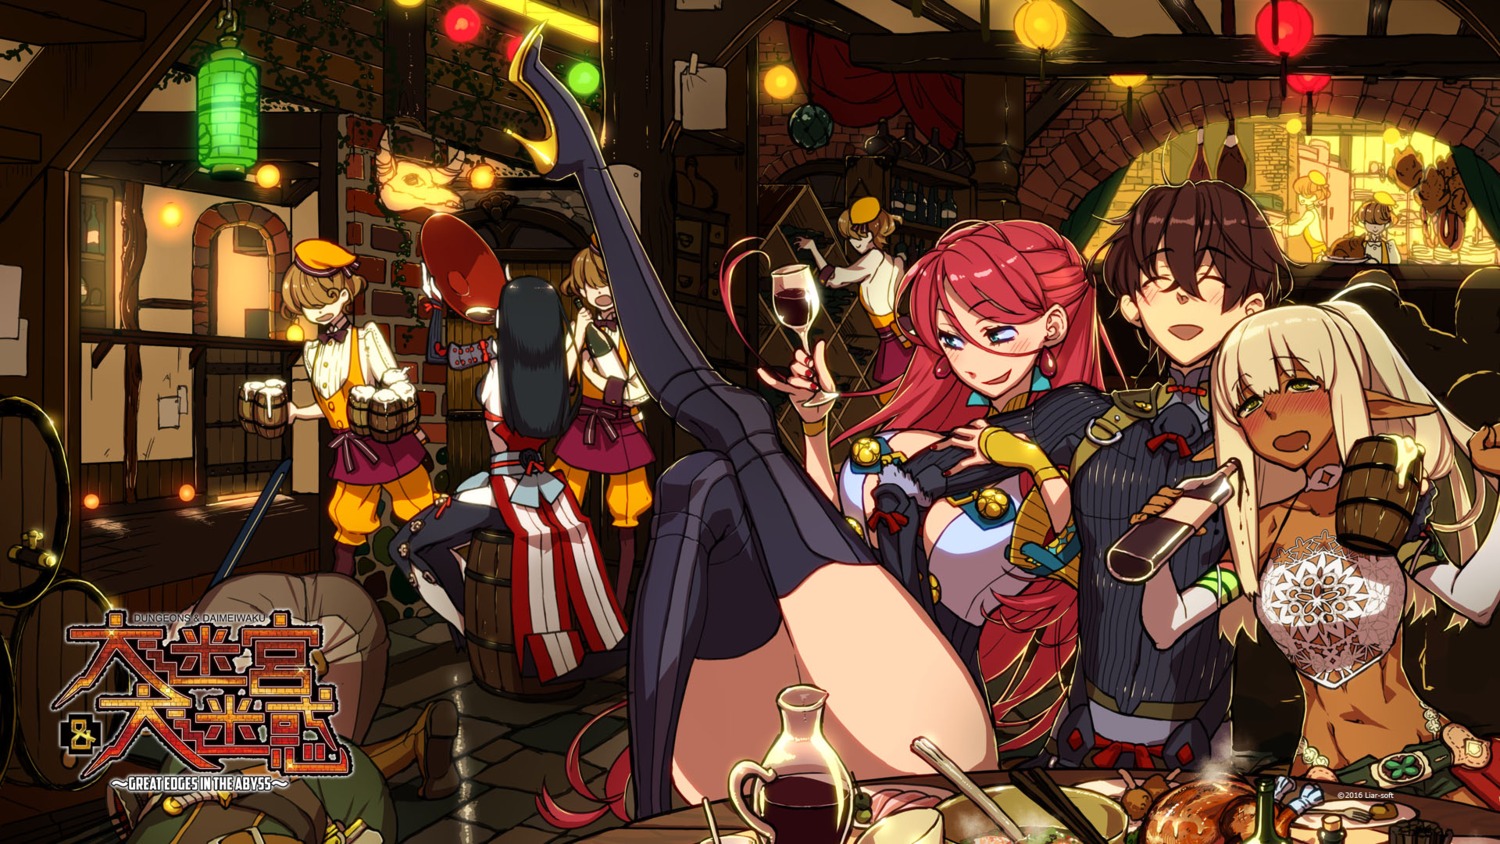 armor dungeons_&_daimeiwaku_~great_edges_in_the_abyss~ game-style heels kome liar-soft no_bra open_shirt pointy_ears see_through thighhighs waitress wallpaper